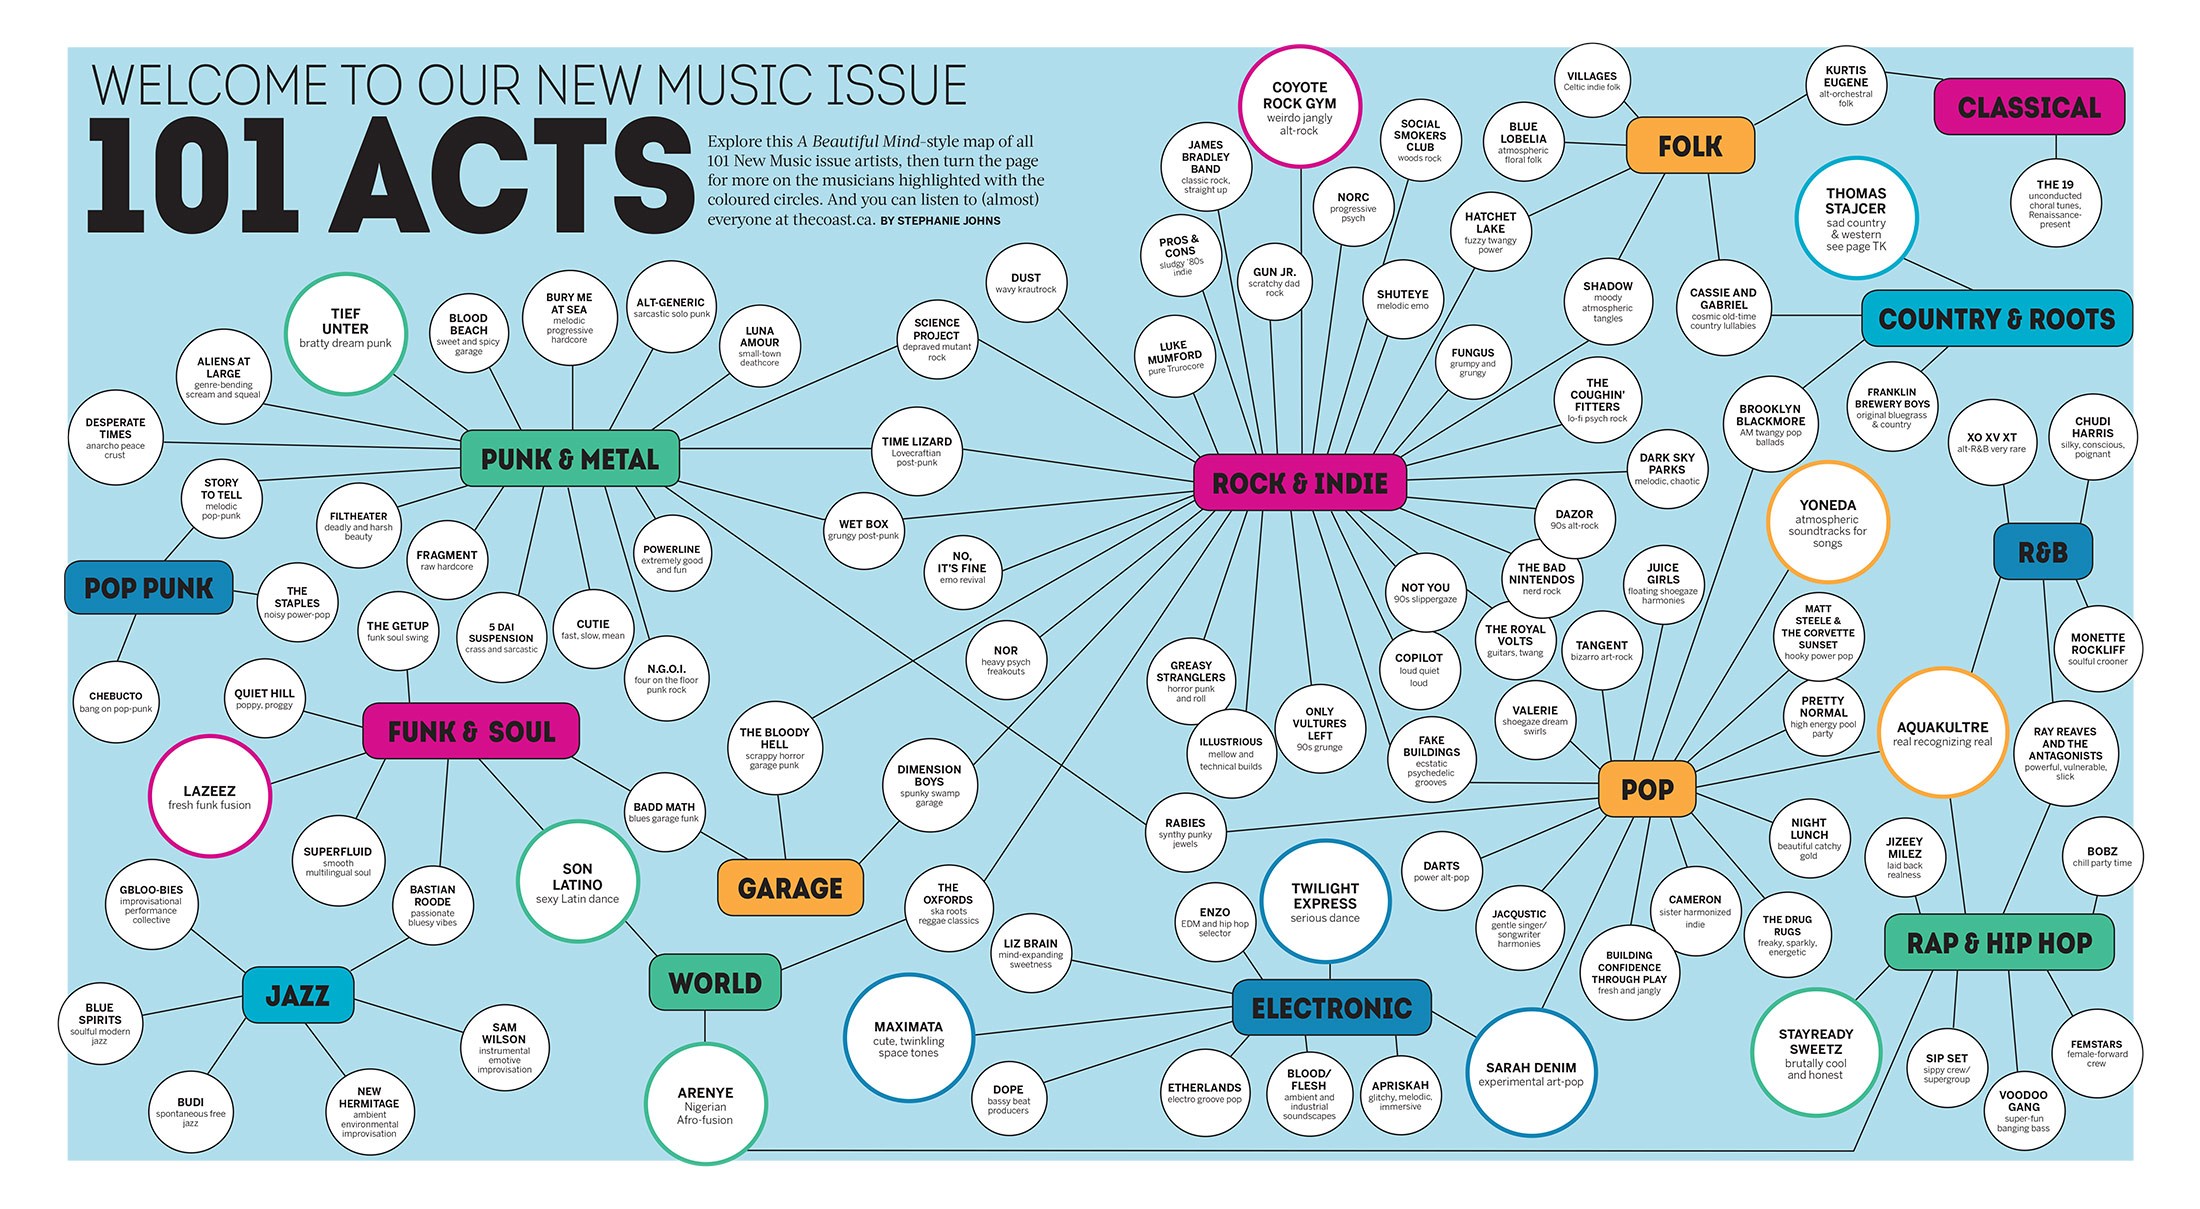 Whoa, that's a lot of music: New Music 2017 mapped out